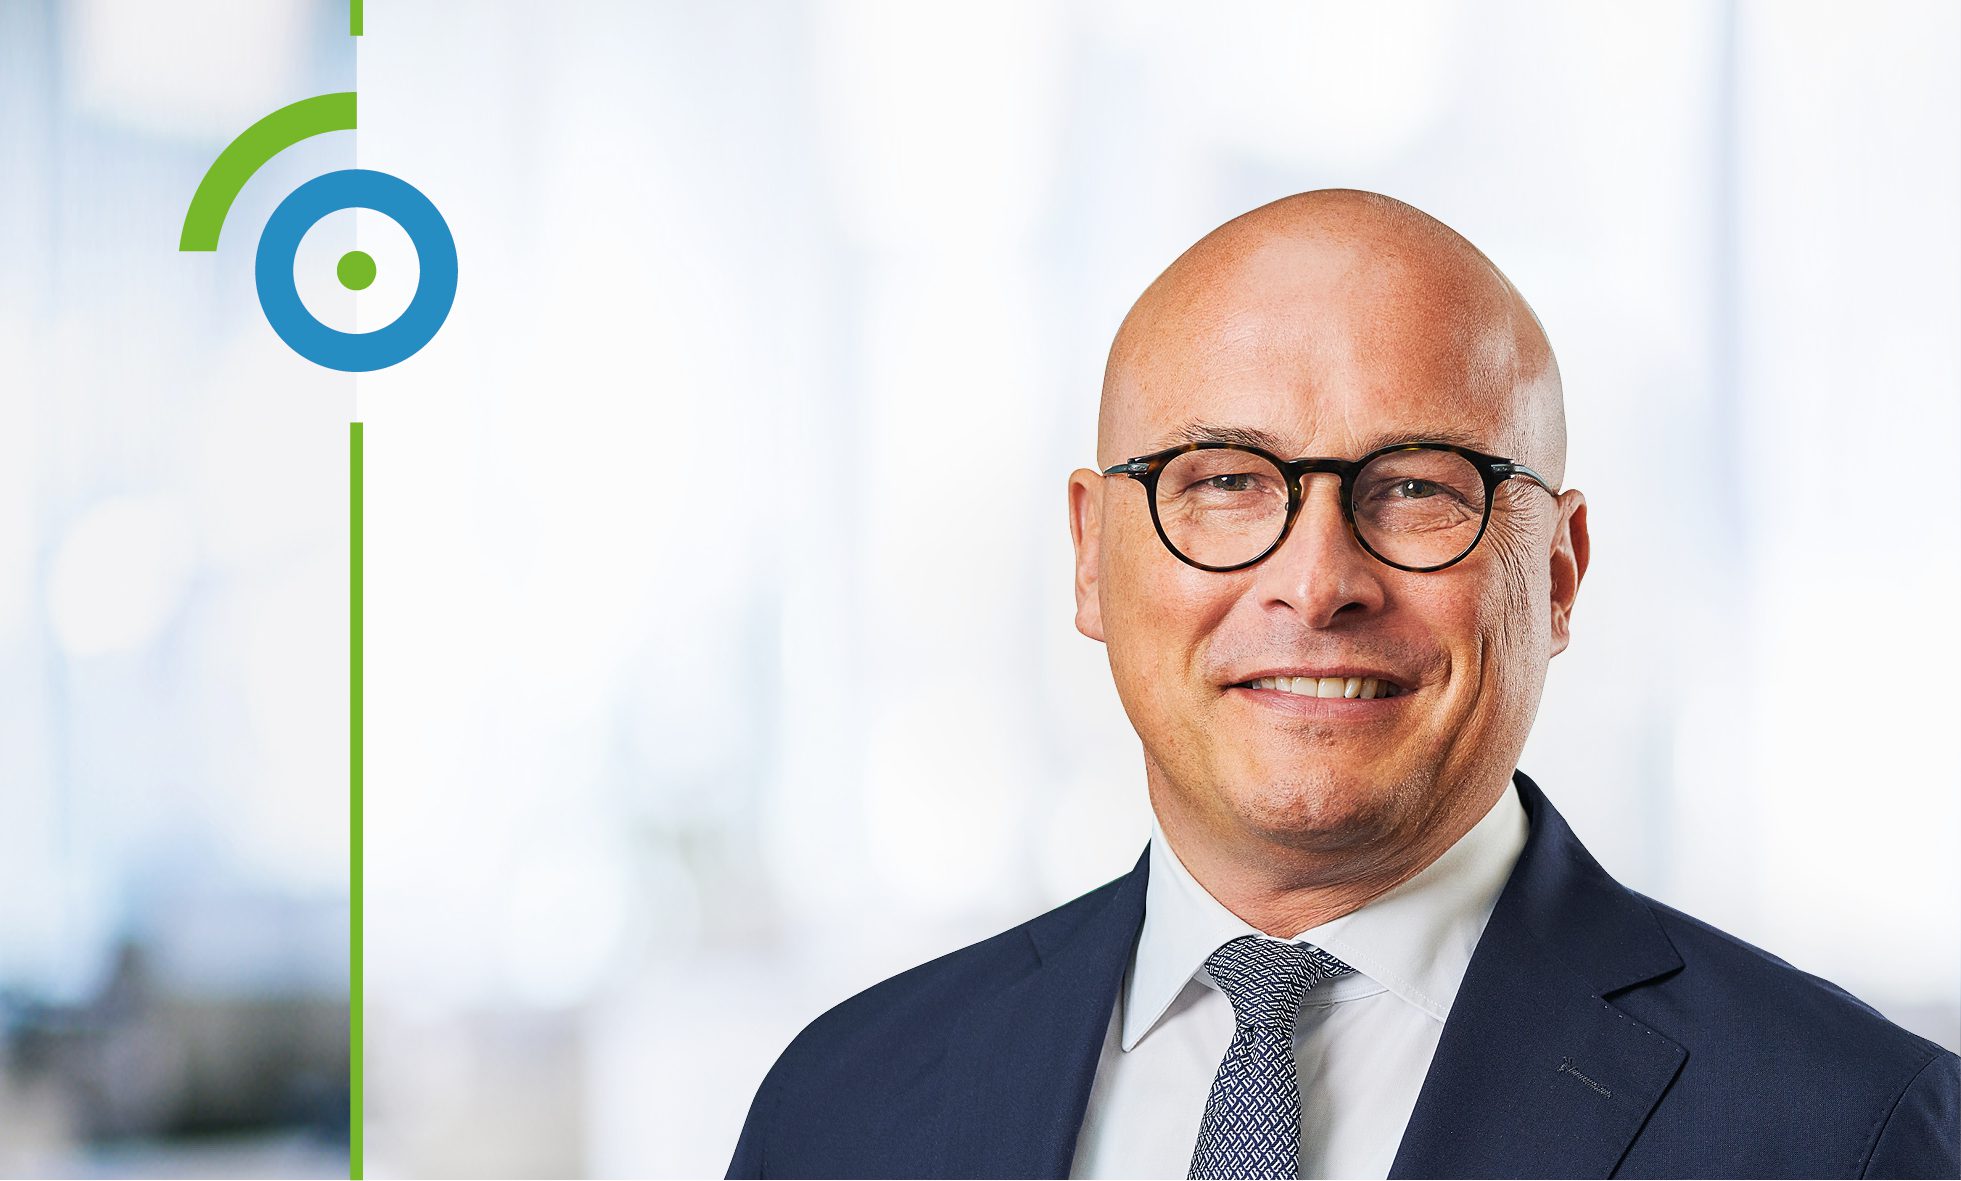 KPI OceanConnect and Bunker Holding’s key account management unit, BOGA, to join forces under the leadership of Anders Grønborg